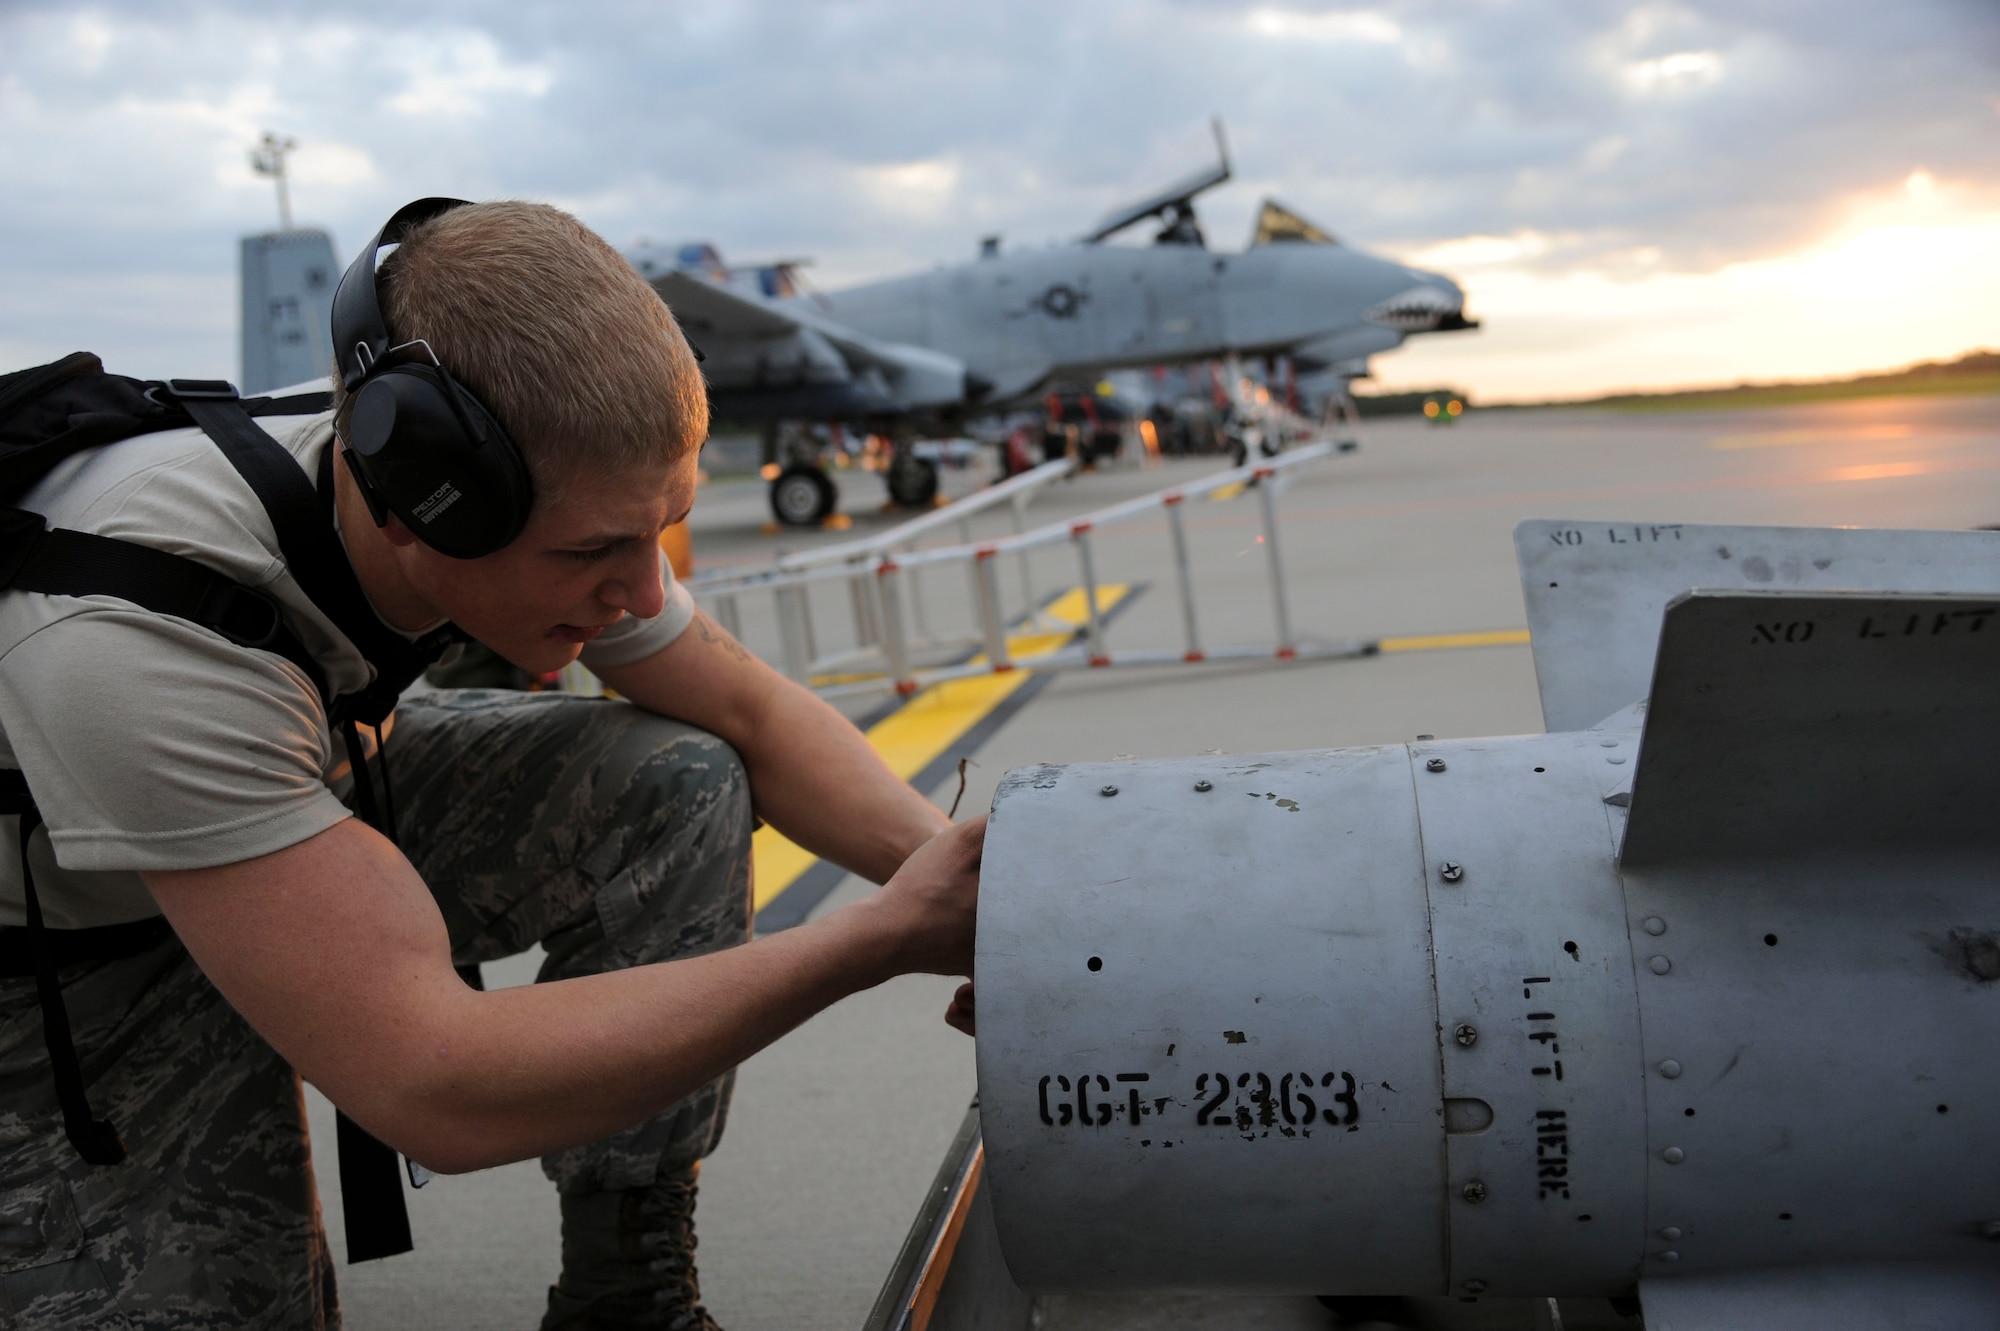 U.S. Air Force Airman 1st Class Austin Kobus, 74th Expeditionary Fighter Squadron weapons load crew member, removes the grounding strap from a Training Guided Missile to prepare for munition loading prior to the first A-10 Thunderbolt II attack aircraft  sortie during a theater security package deployment at Amari Air Base, Estonia, Sept. 23, 2015. As a weapons load crew member, Kobus is responsible for preparing the munitions for loading. (U.S. Air Force photo by Andrea Jenkins/Released)